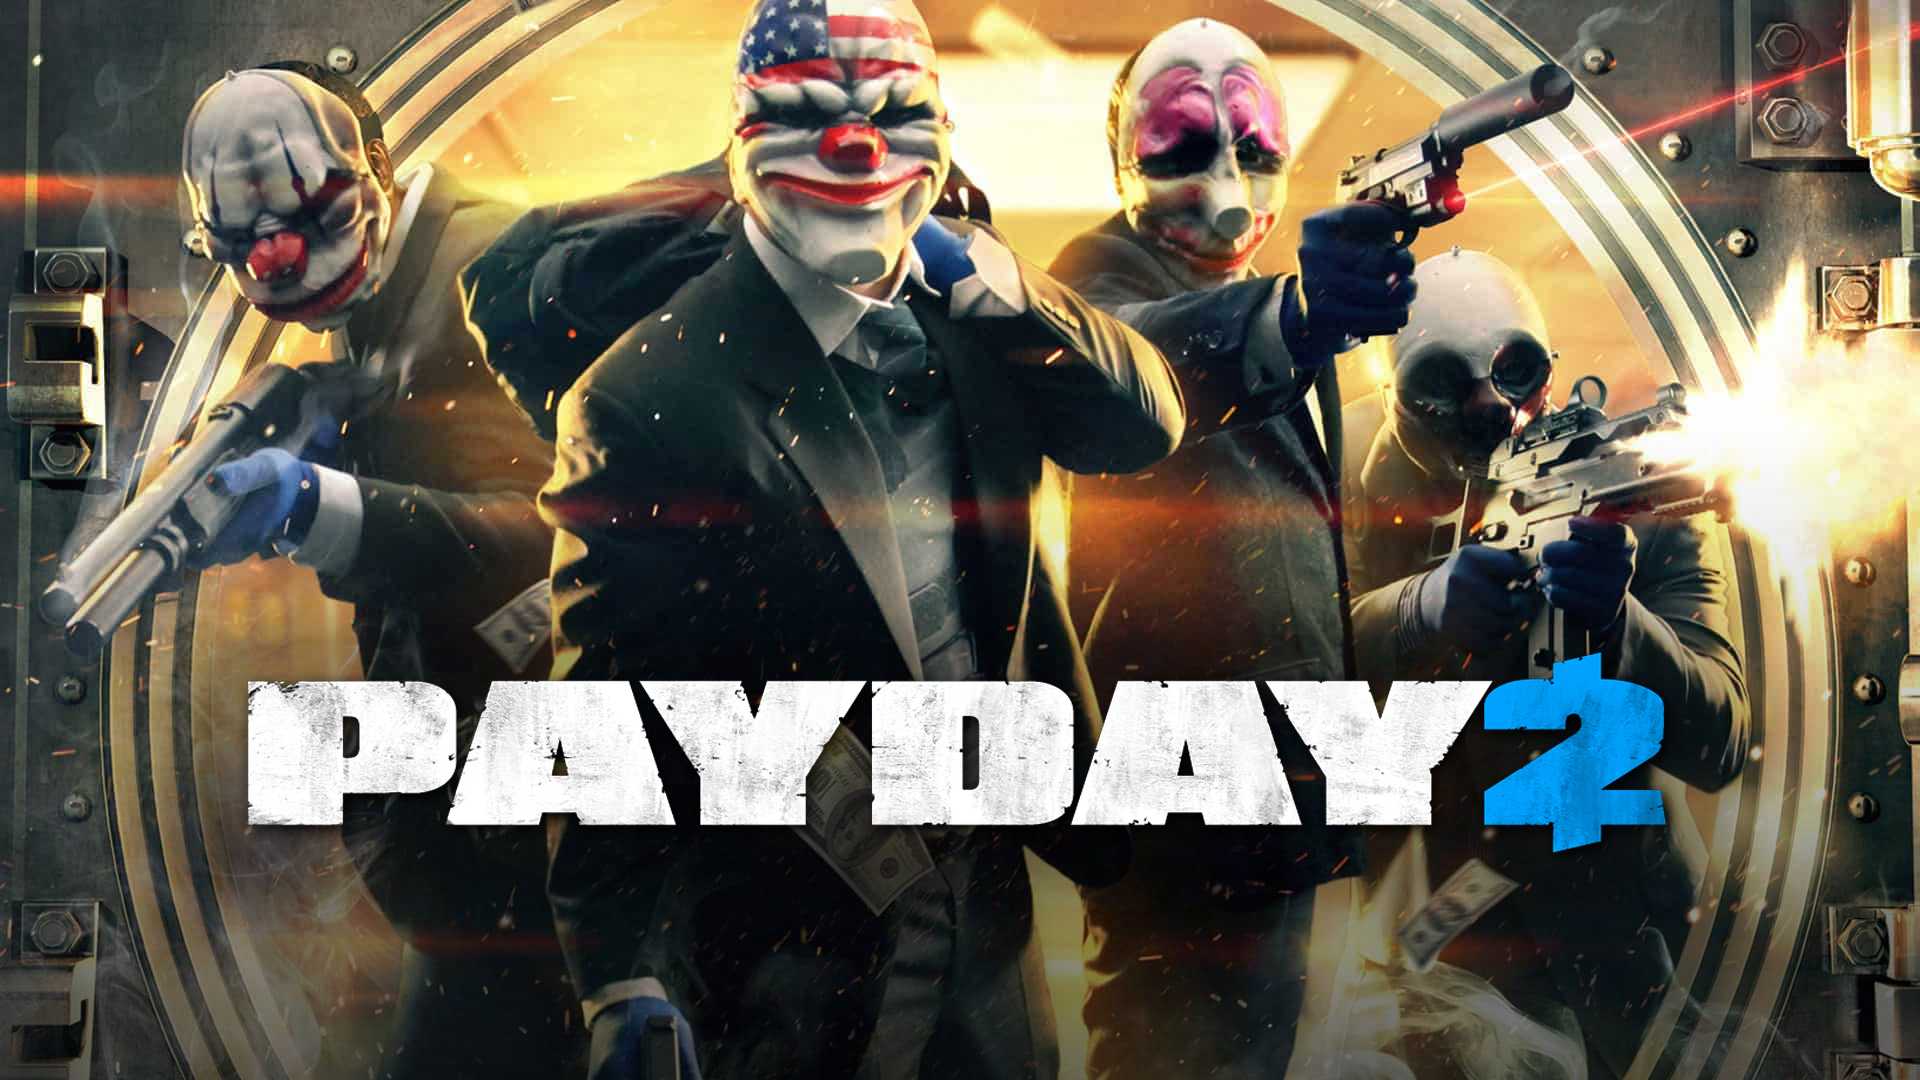 Game one payday 2 фото 56